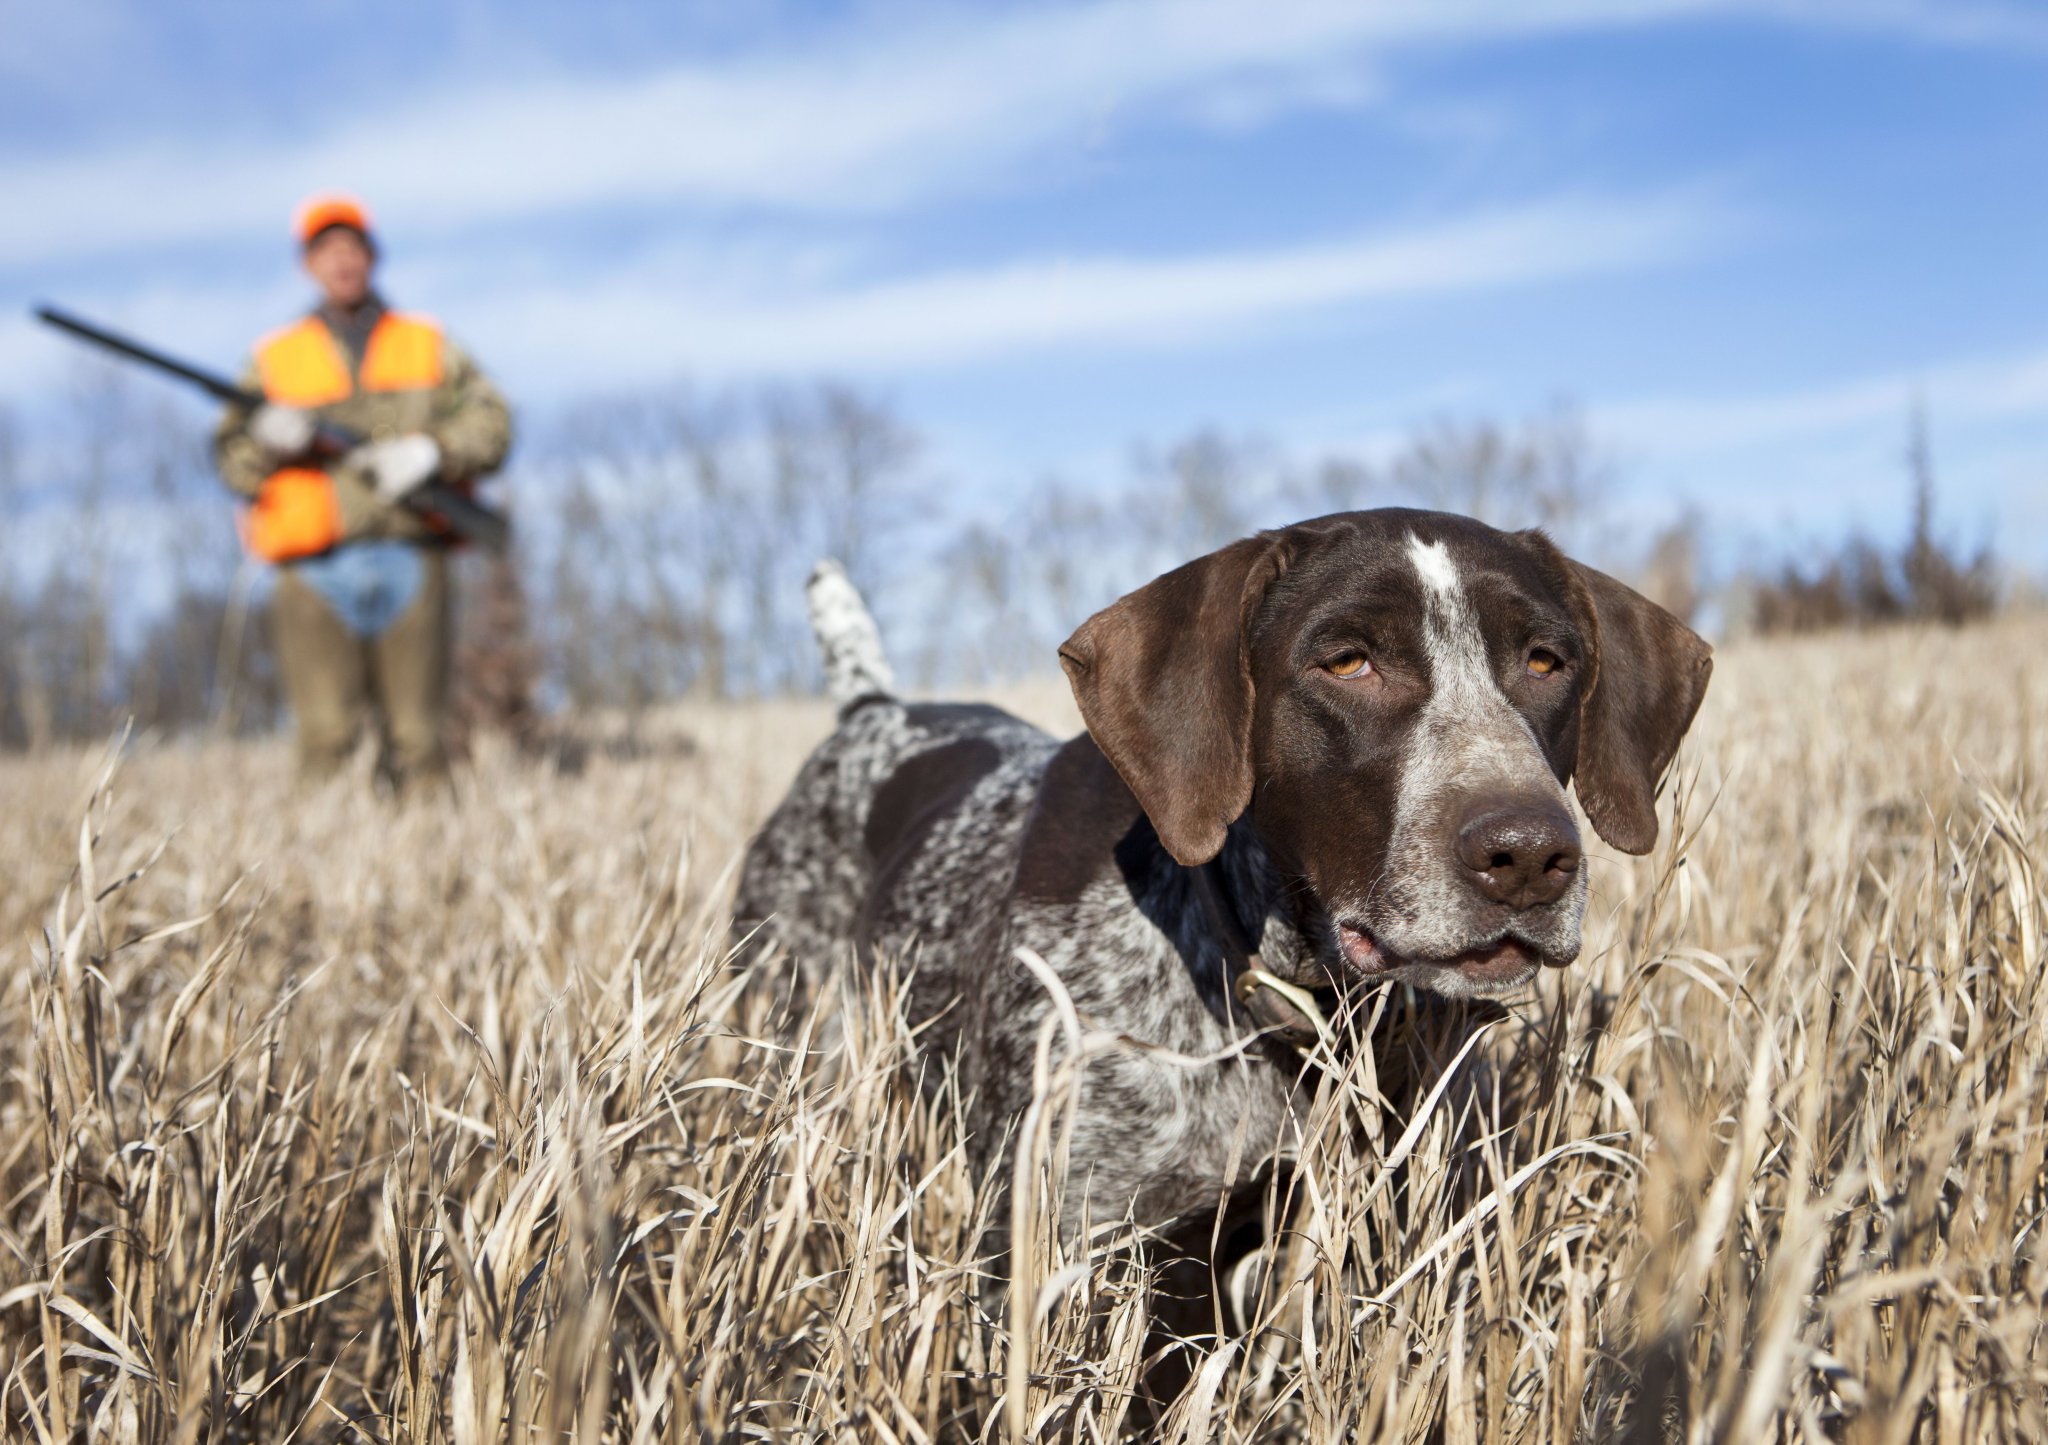 german-wirehair-pointer-and-man-upland-bird-hunting--155150710-5bd88cccc9e77c00511974f1.jpeg